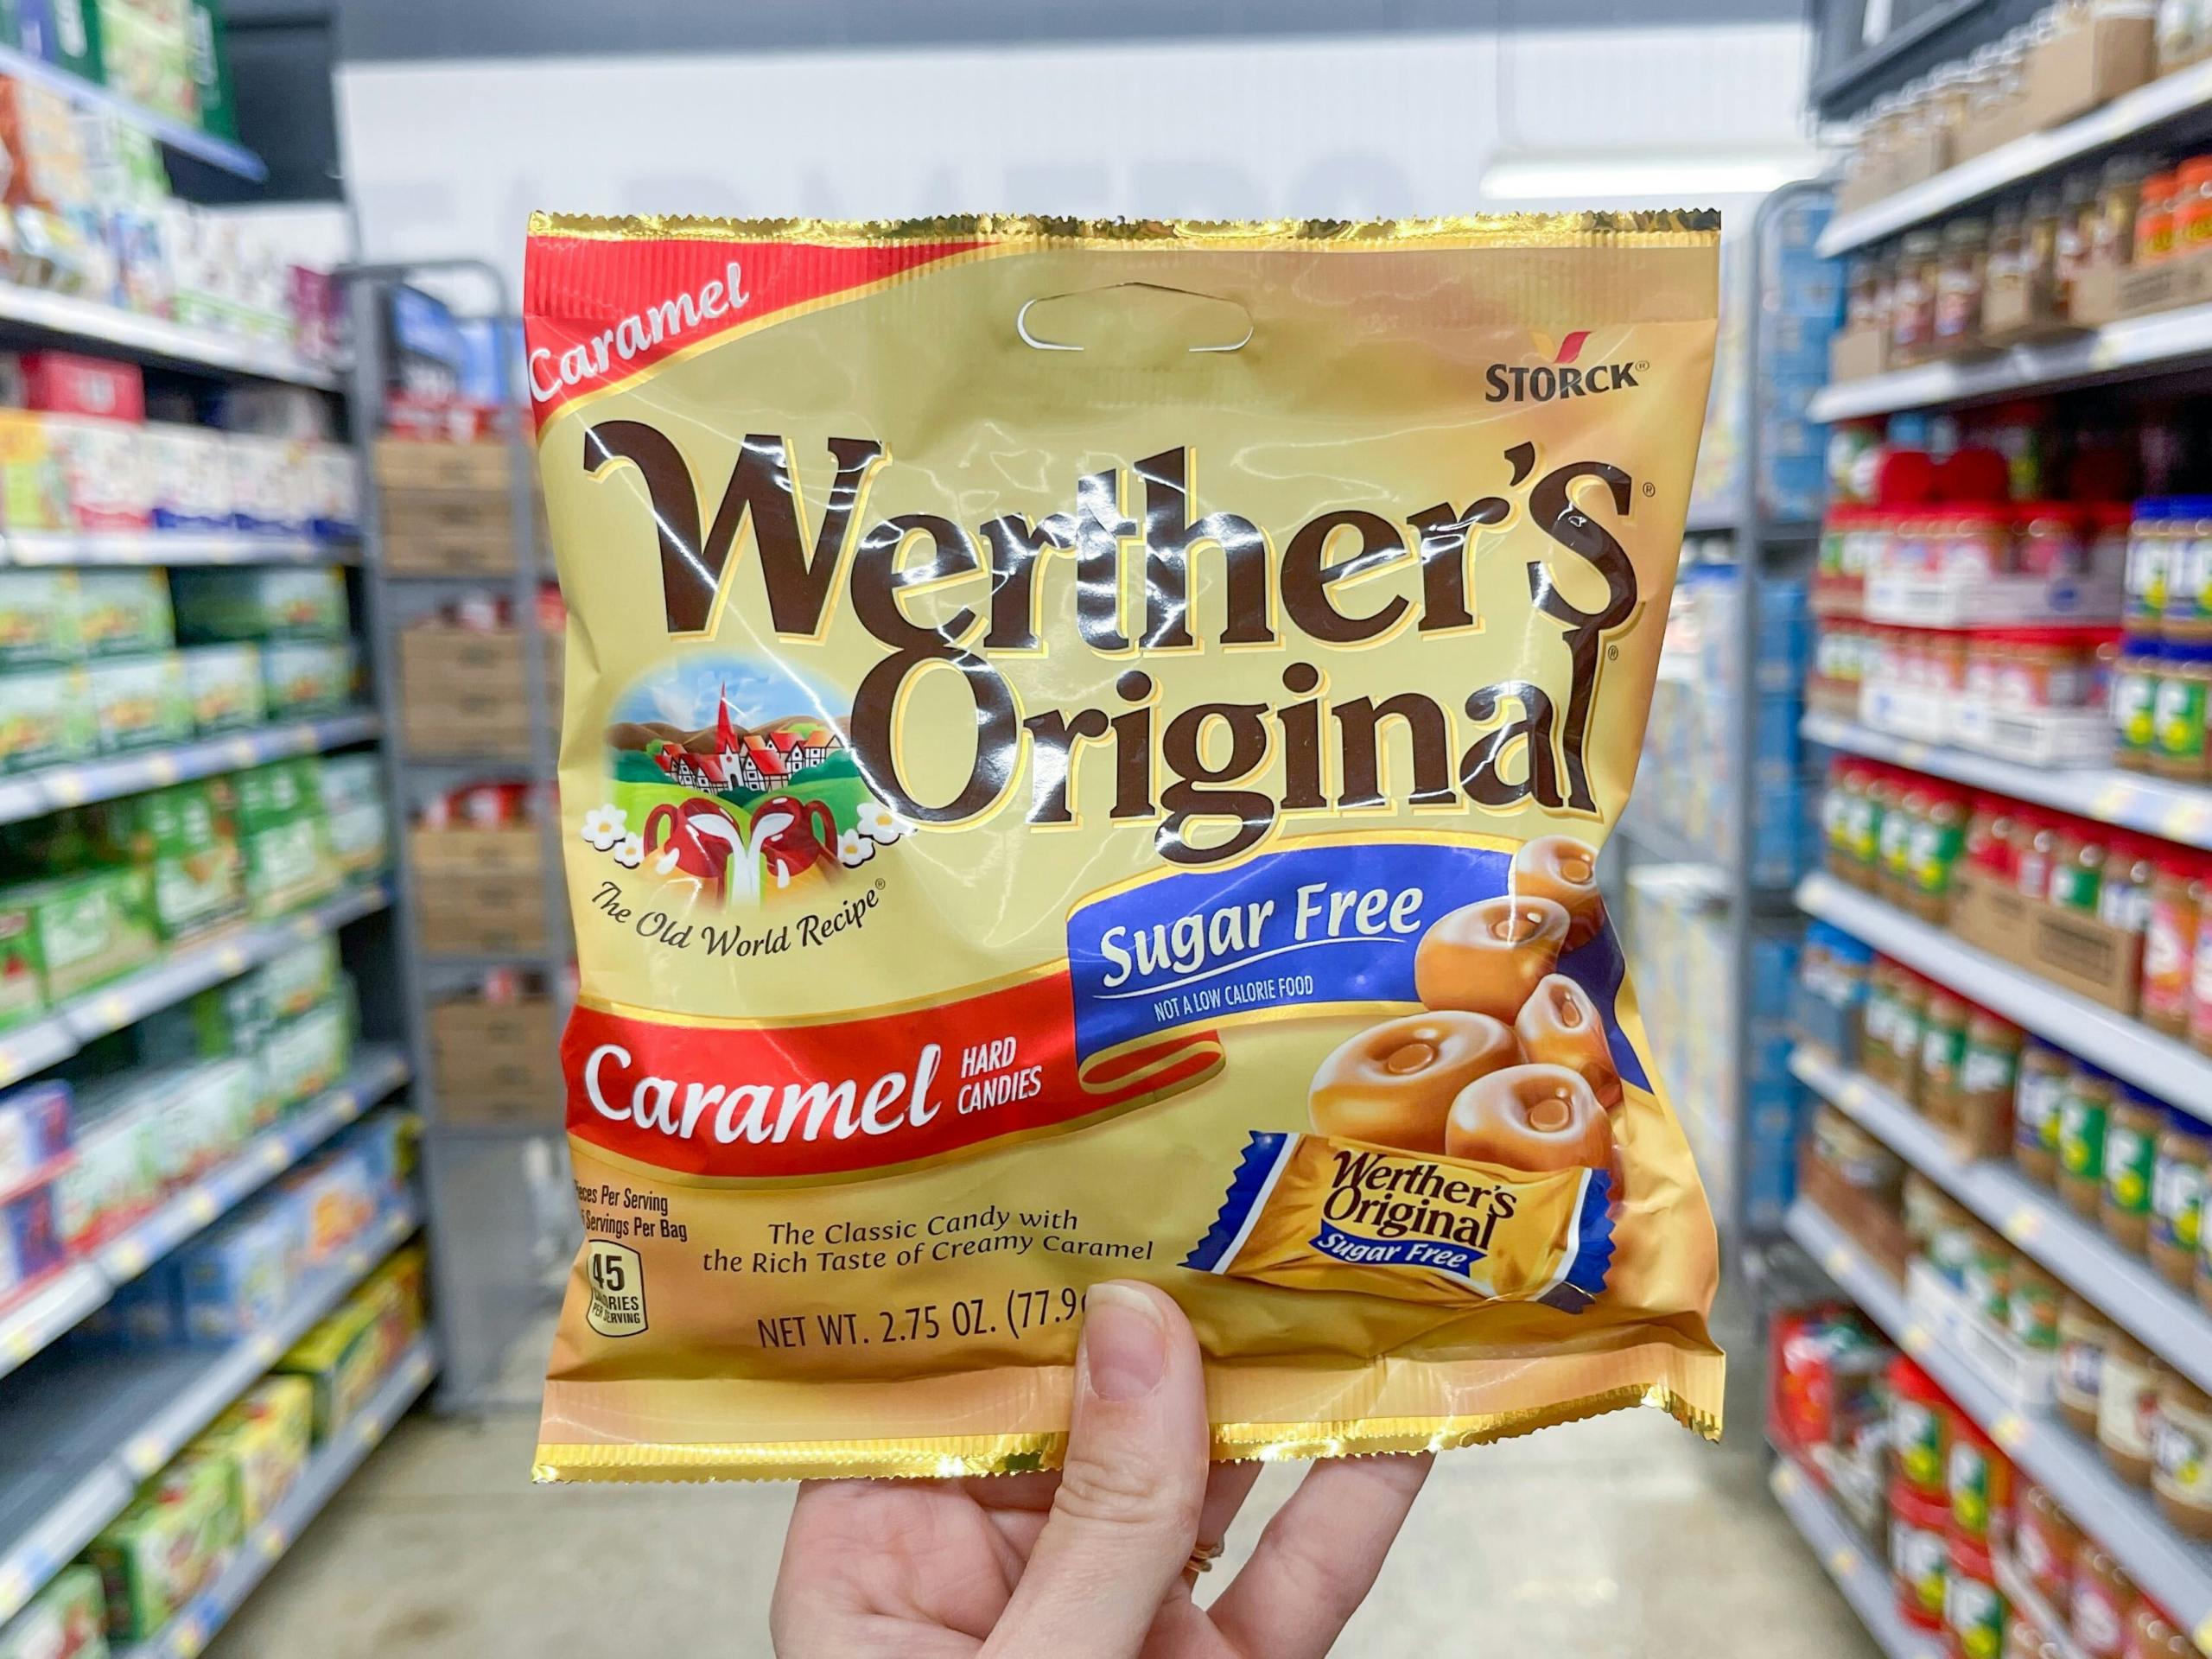 A Werther's Original candy package held out by hand in front of a store aisle.